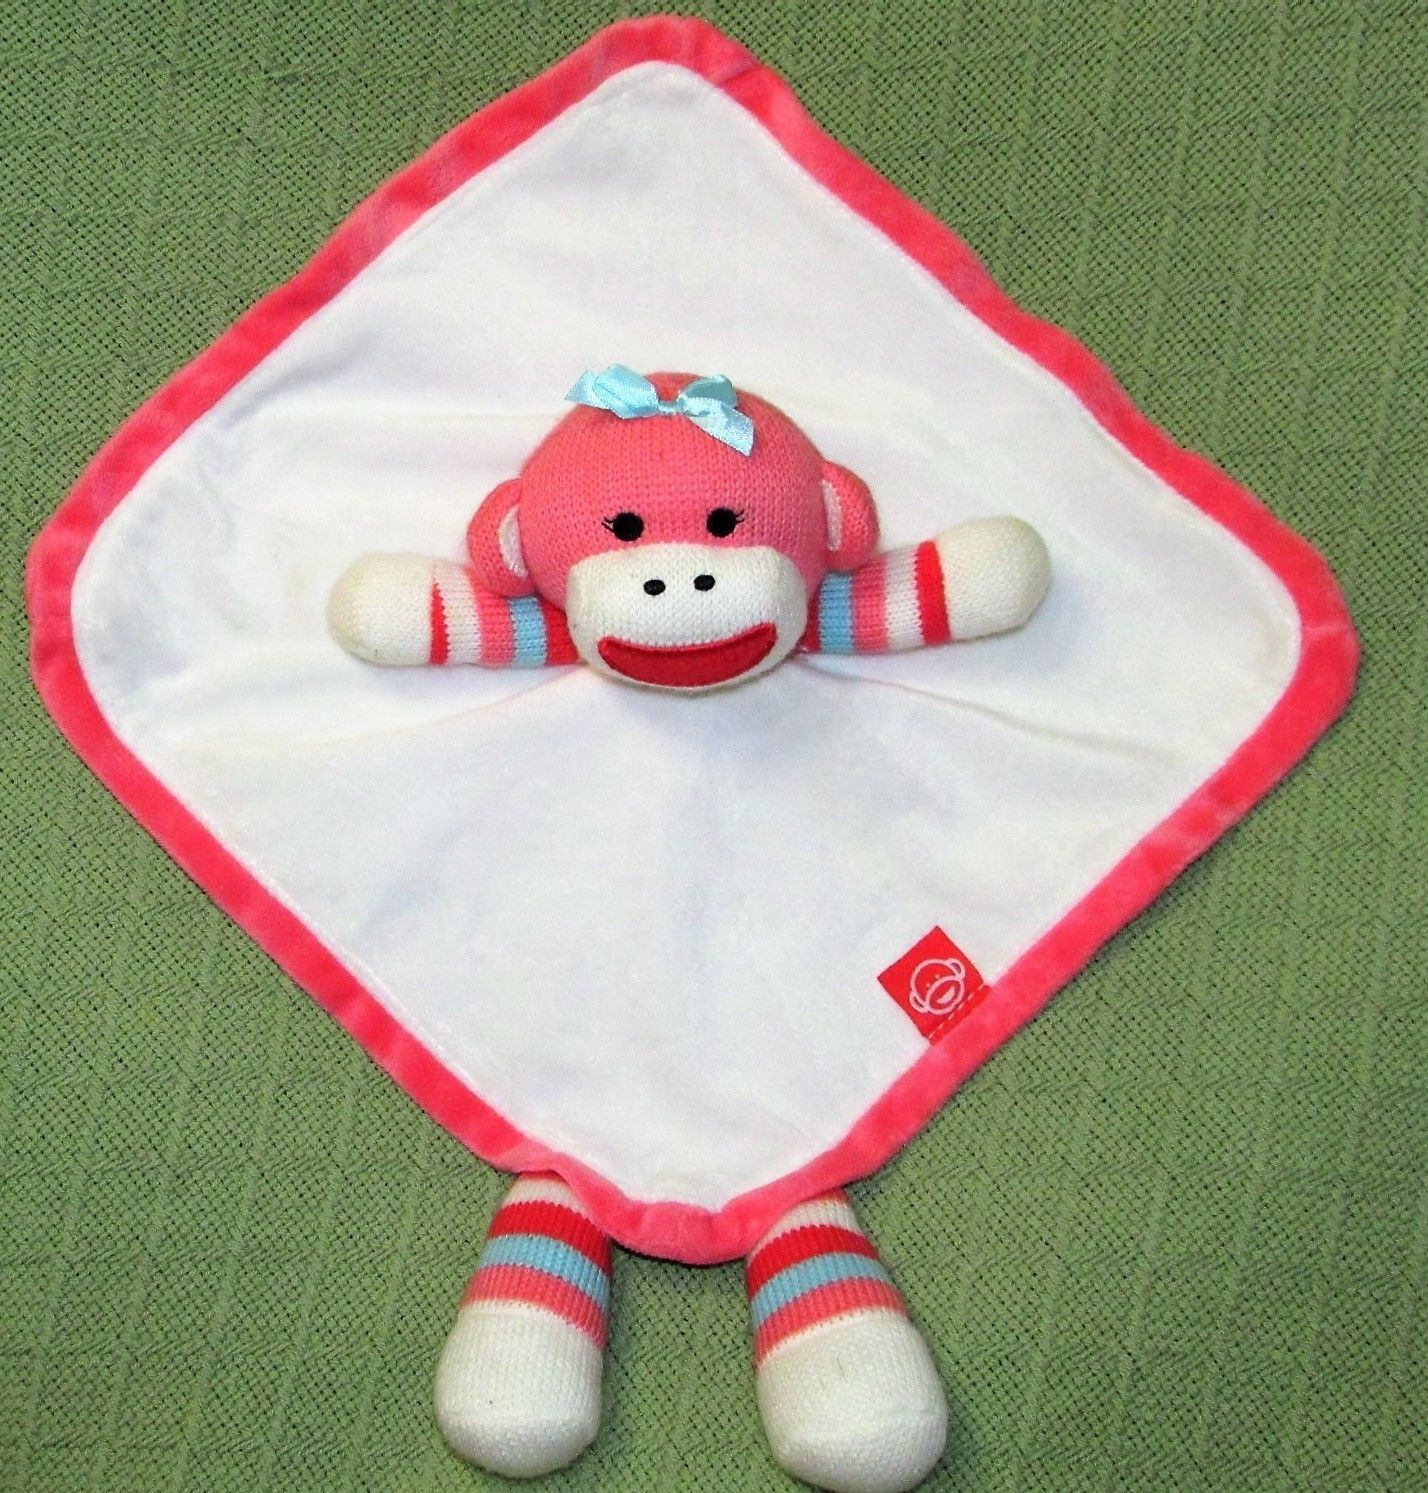 Baby Starters Plush Pink Sock Monkey Striped Rattle Striped Security Blanket  - $14.01